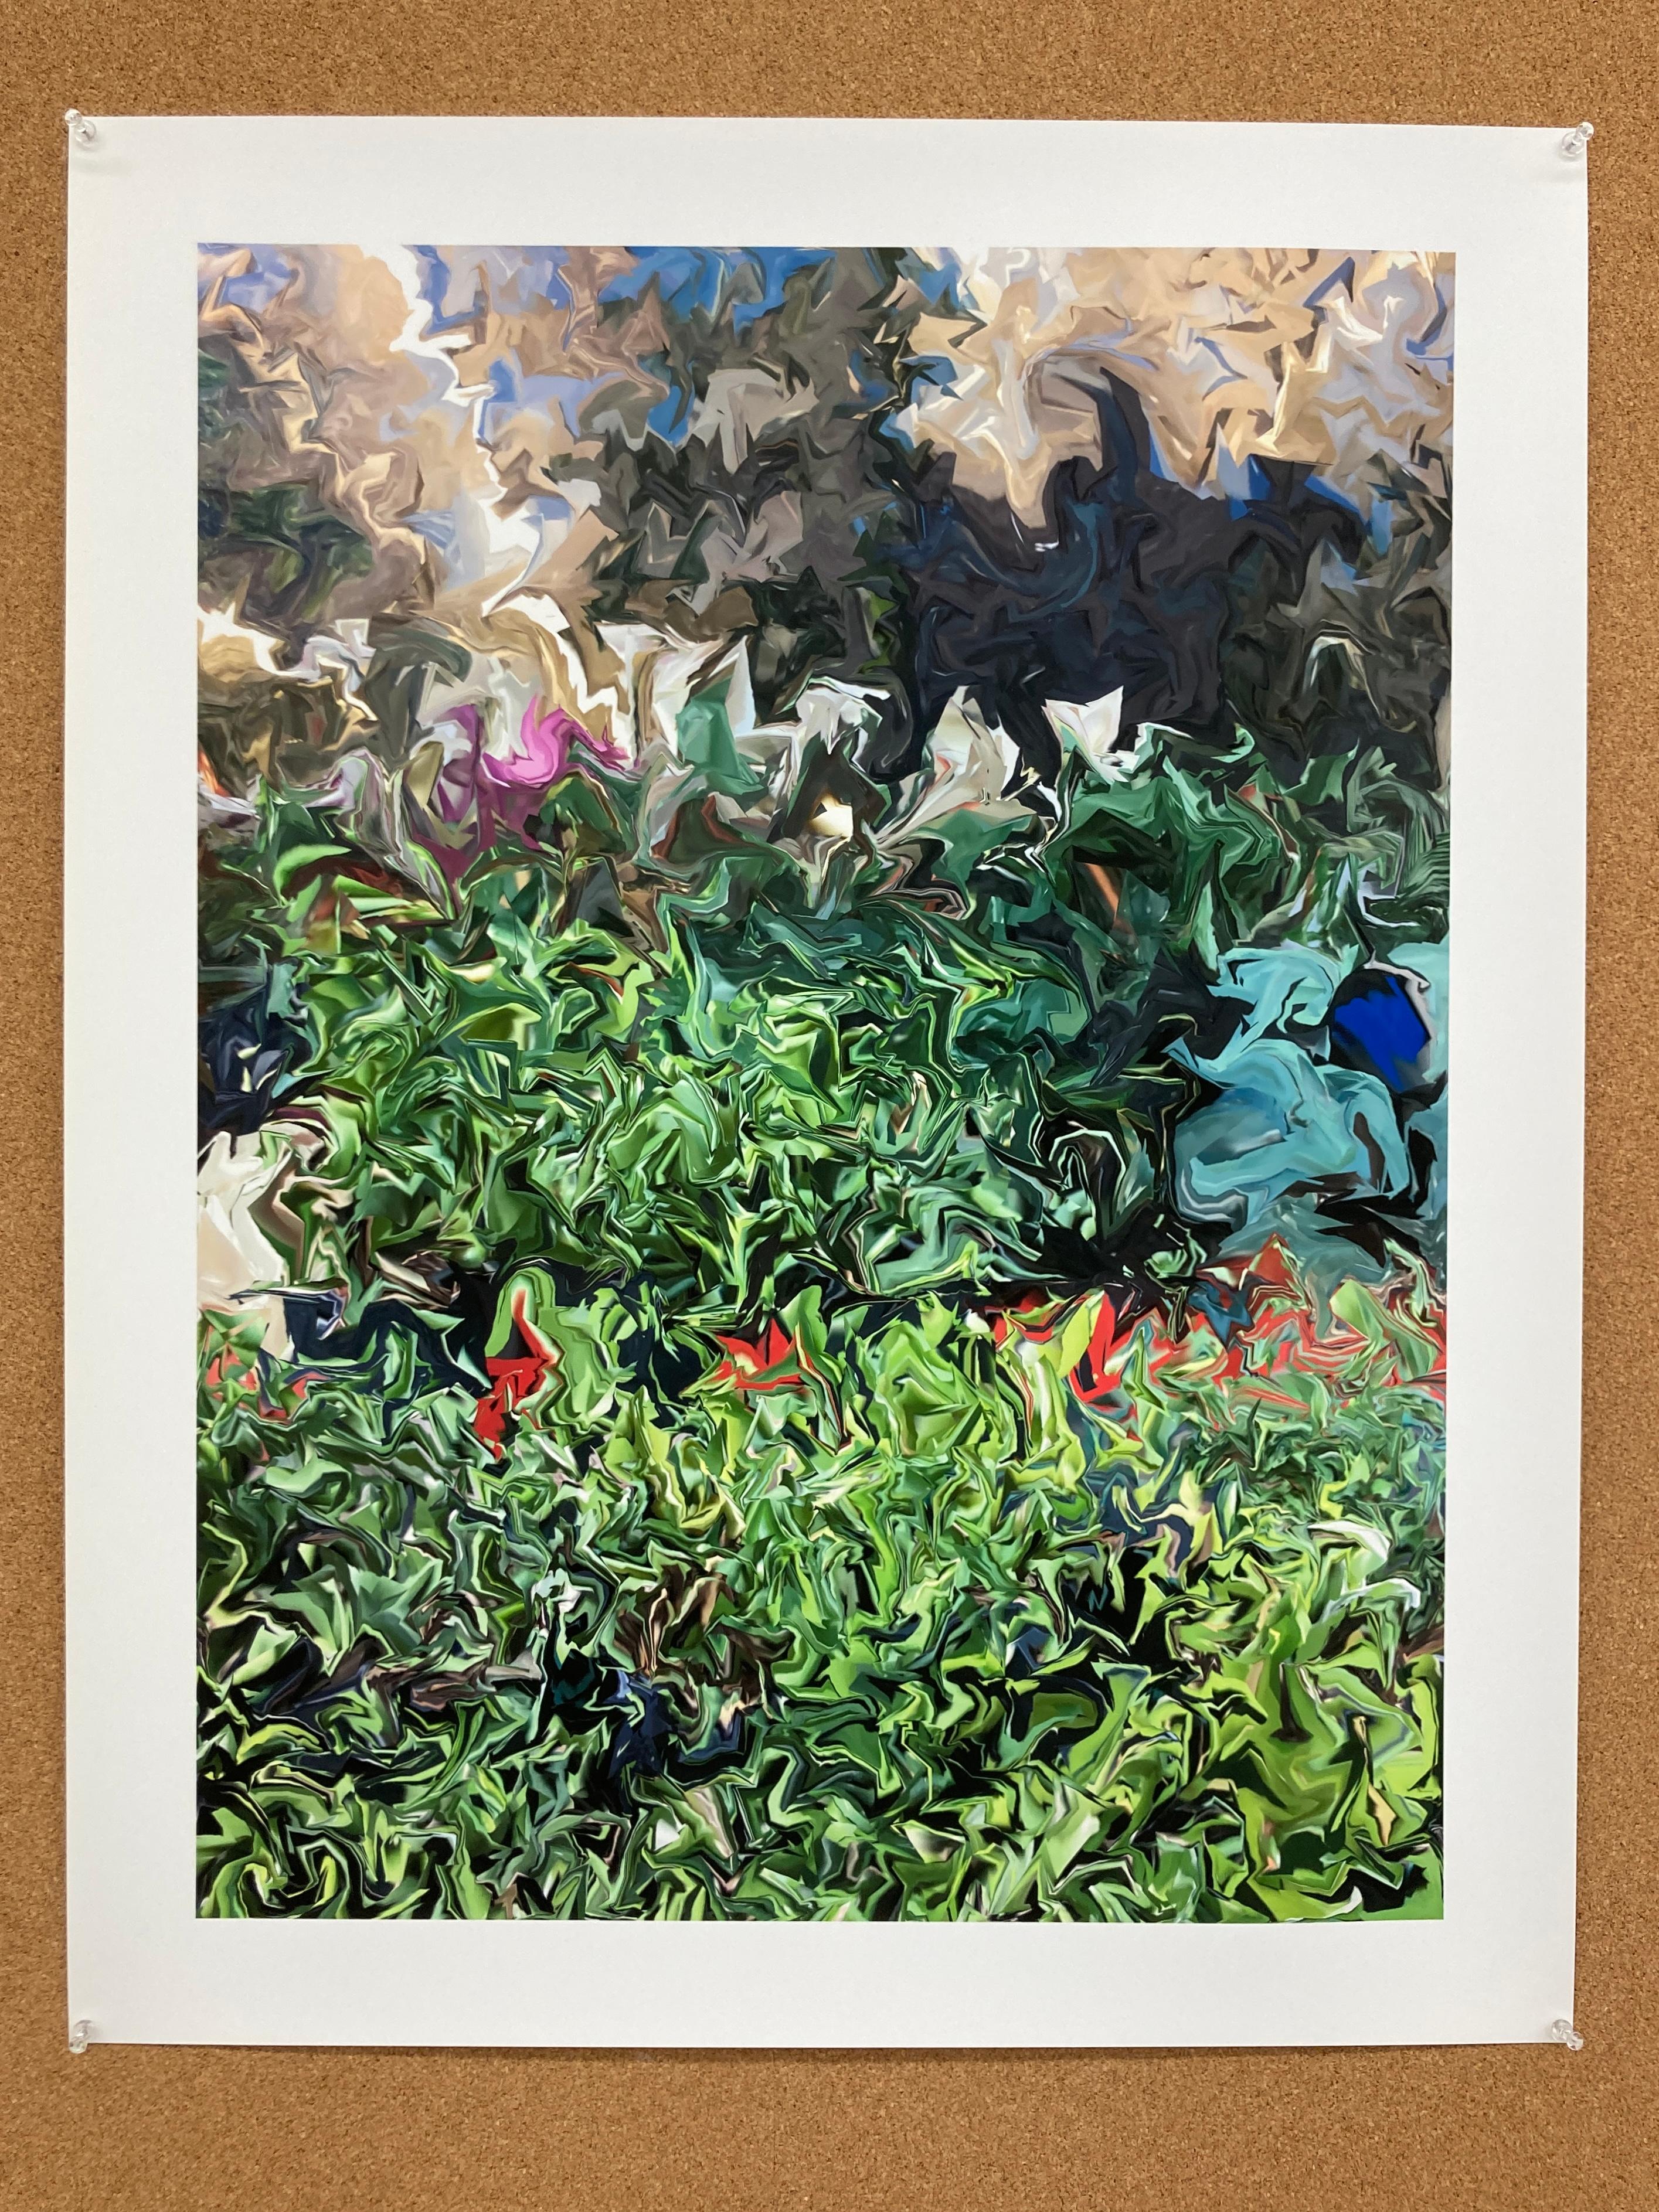 Succulents, 2018, digitally manipulated photograph, signed - Print by Gary Cruz